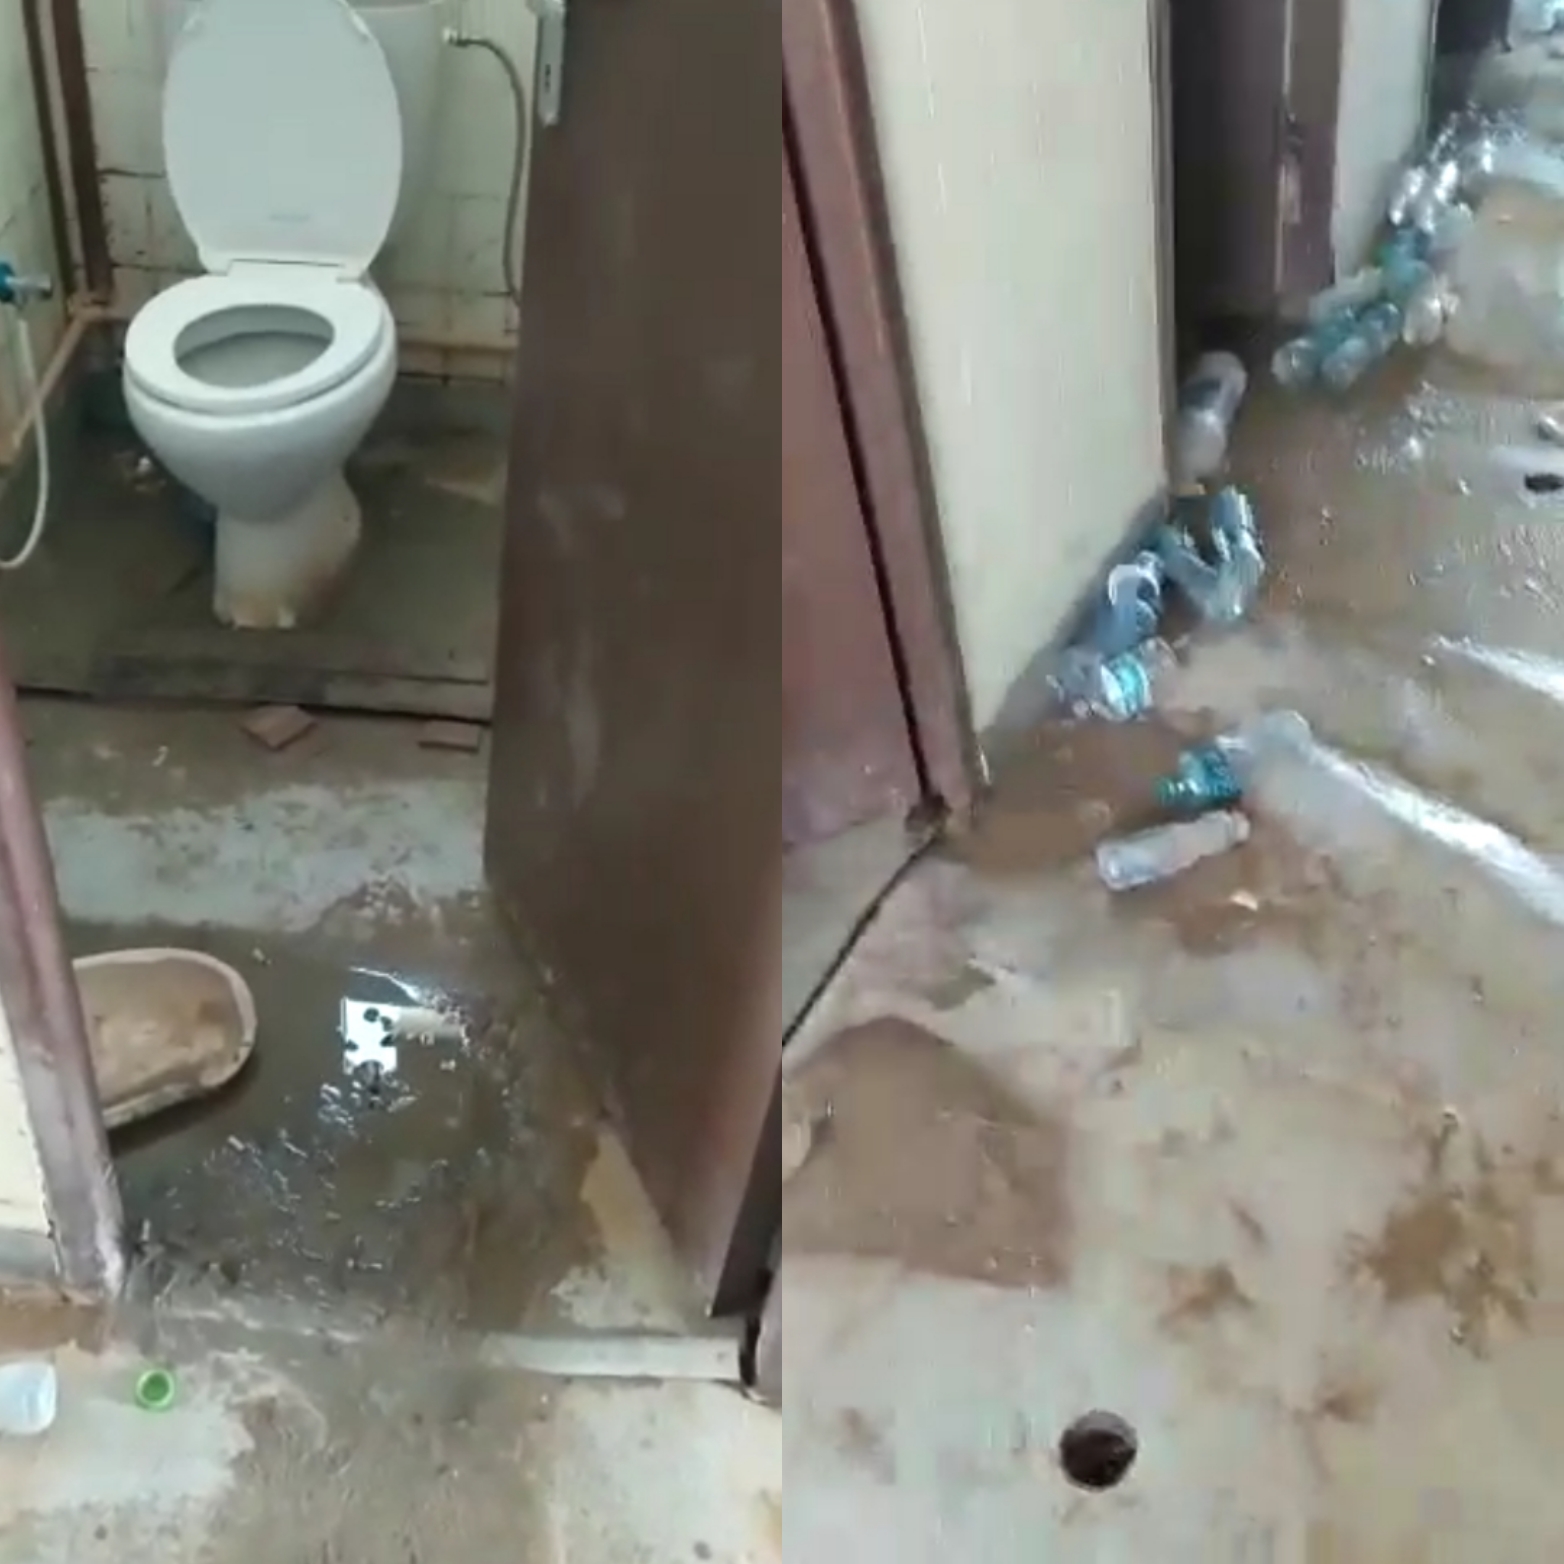 Overflowing sewage and poor wash facilities have prevented workers from cleaning themselves (MEE)